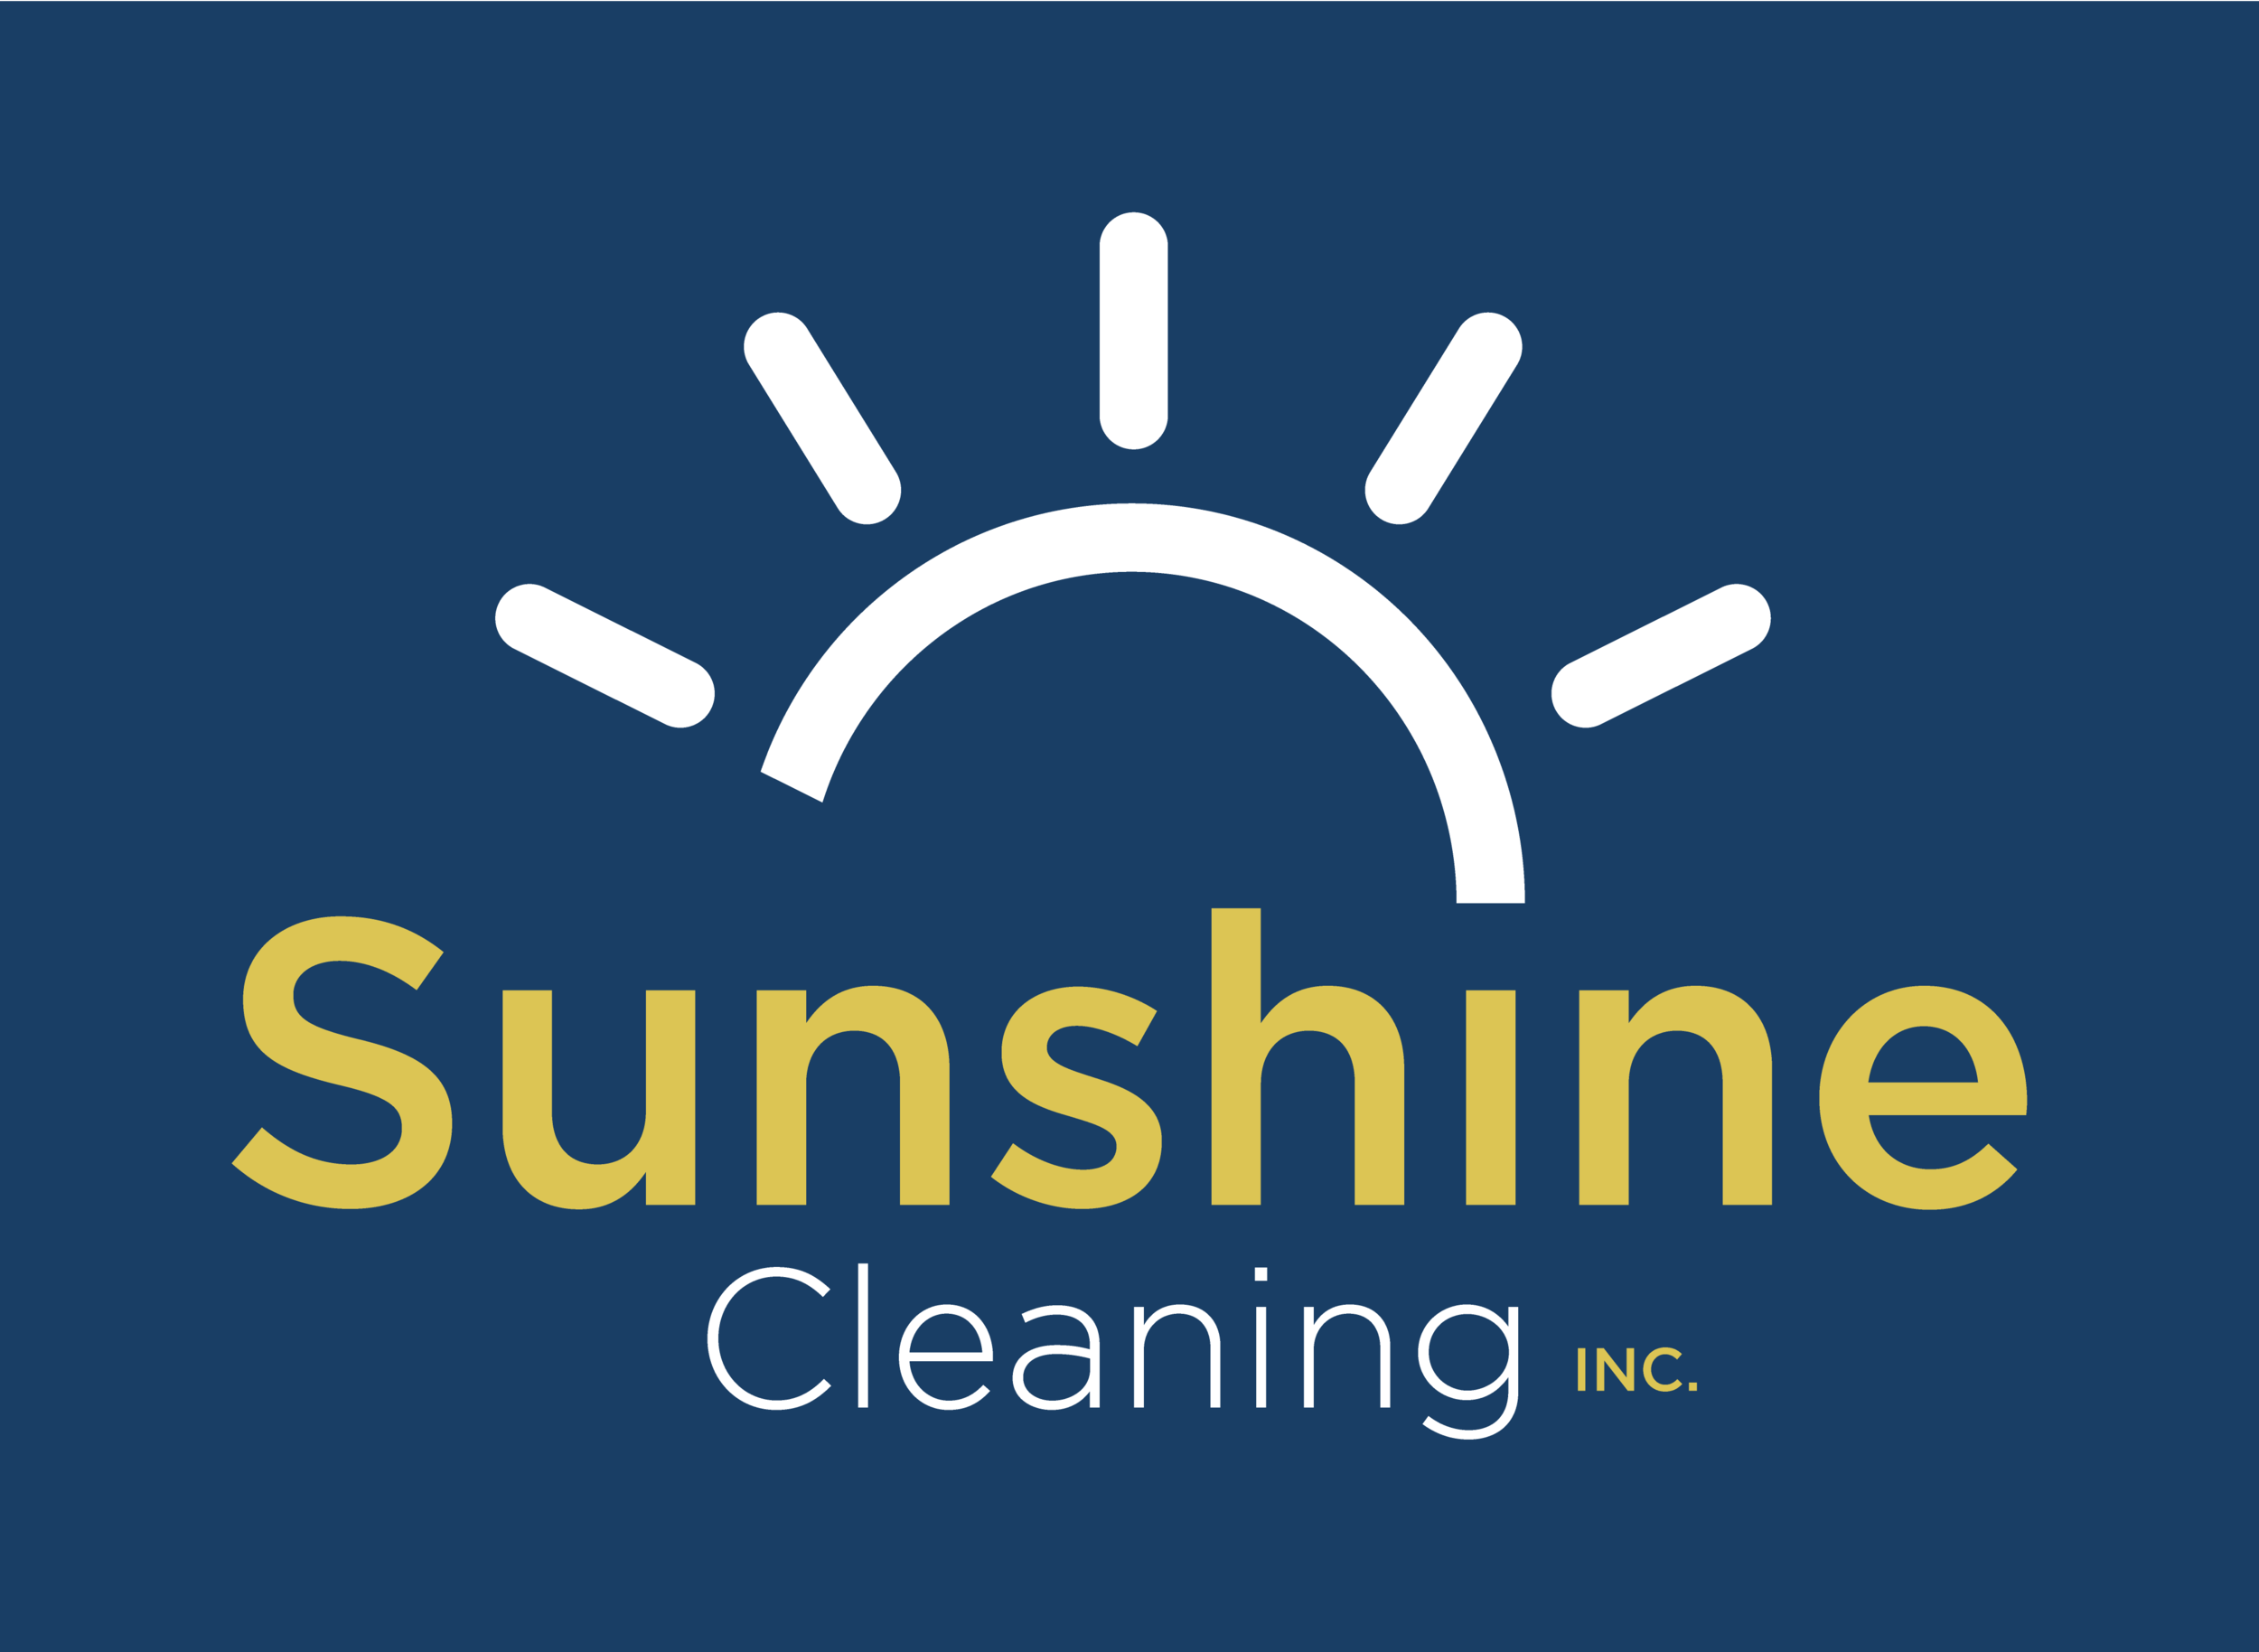 SunshineCleaning_LG_Master_Final-01.png